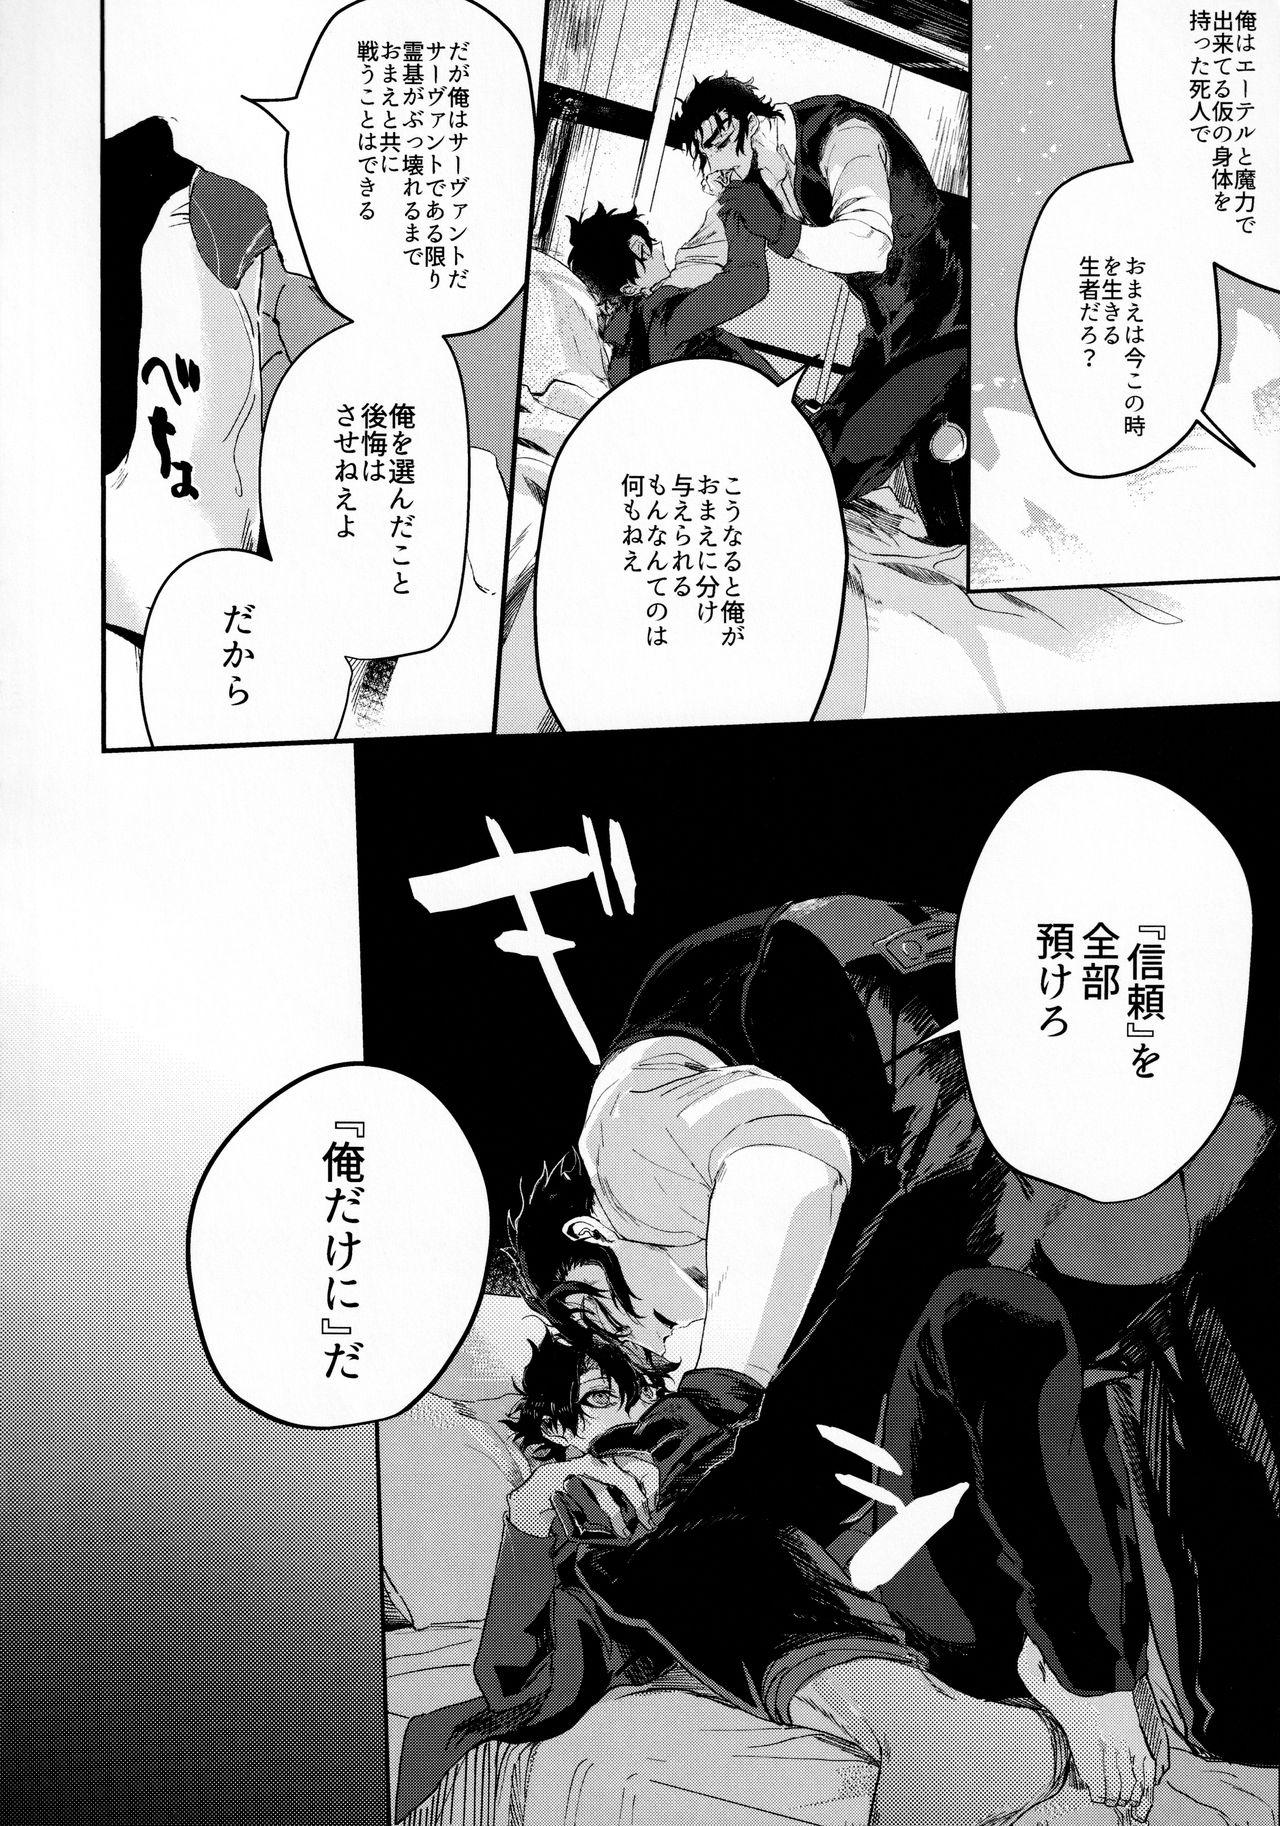 Big Dick 耽溺と熱 - Fate grand order Load - Page 11